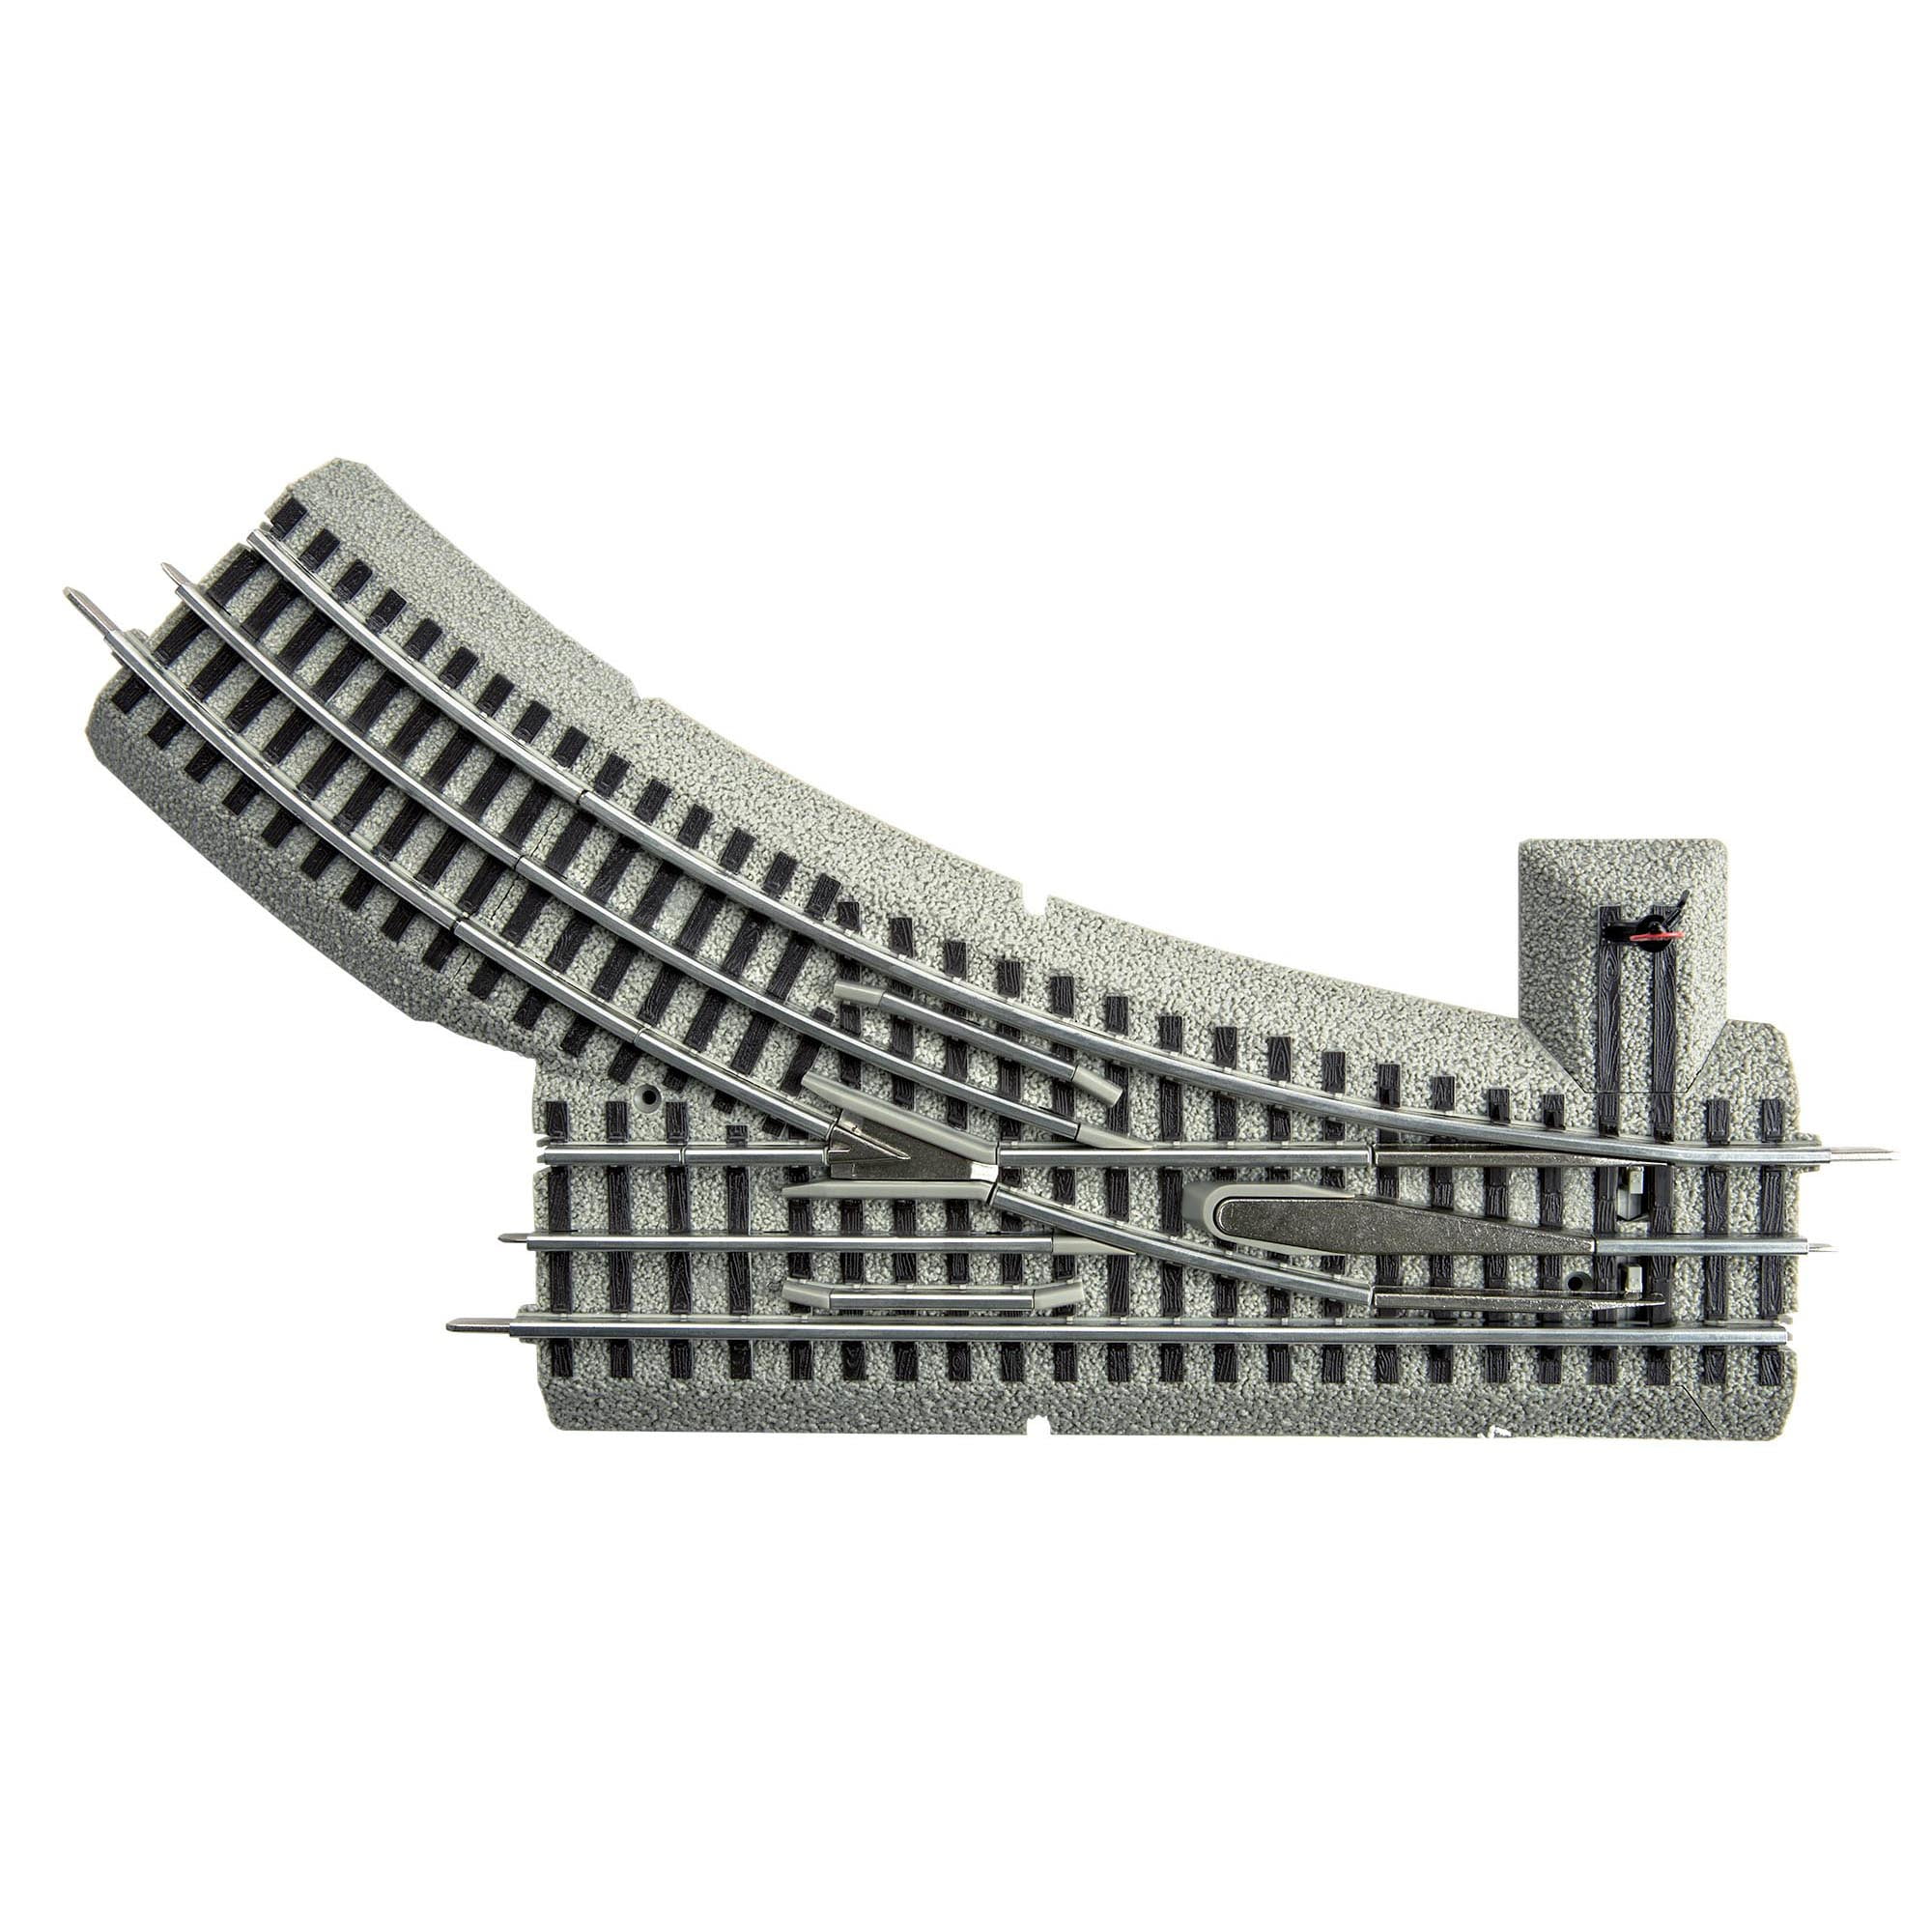 Lionel FasTrack 10 inch Straight Track 612014 for sale online 